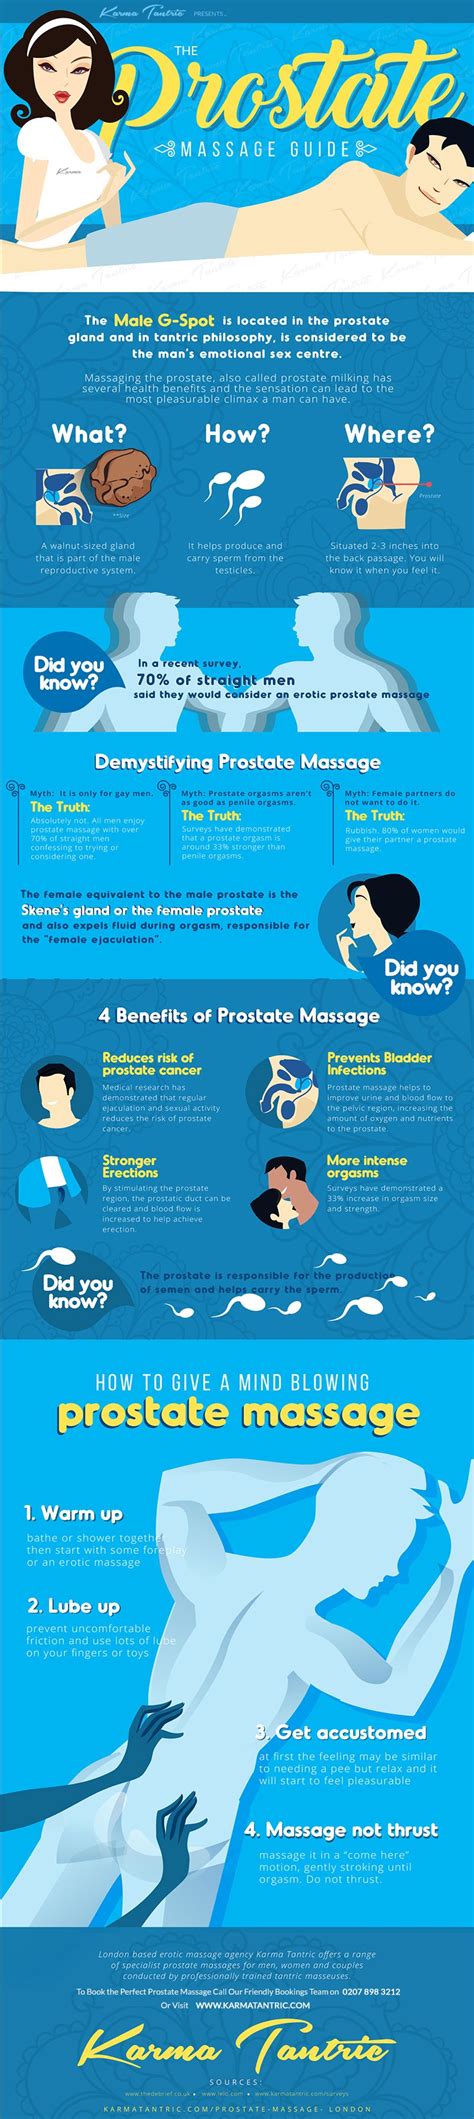 The Prostate Massage Guide Infographic